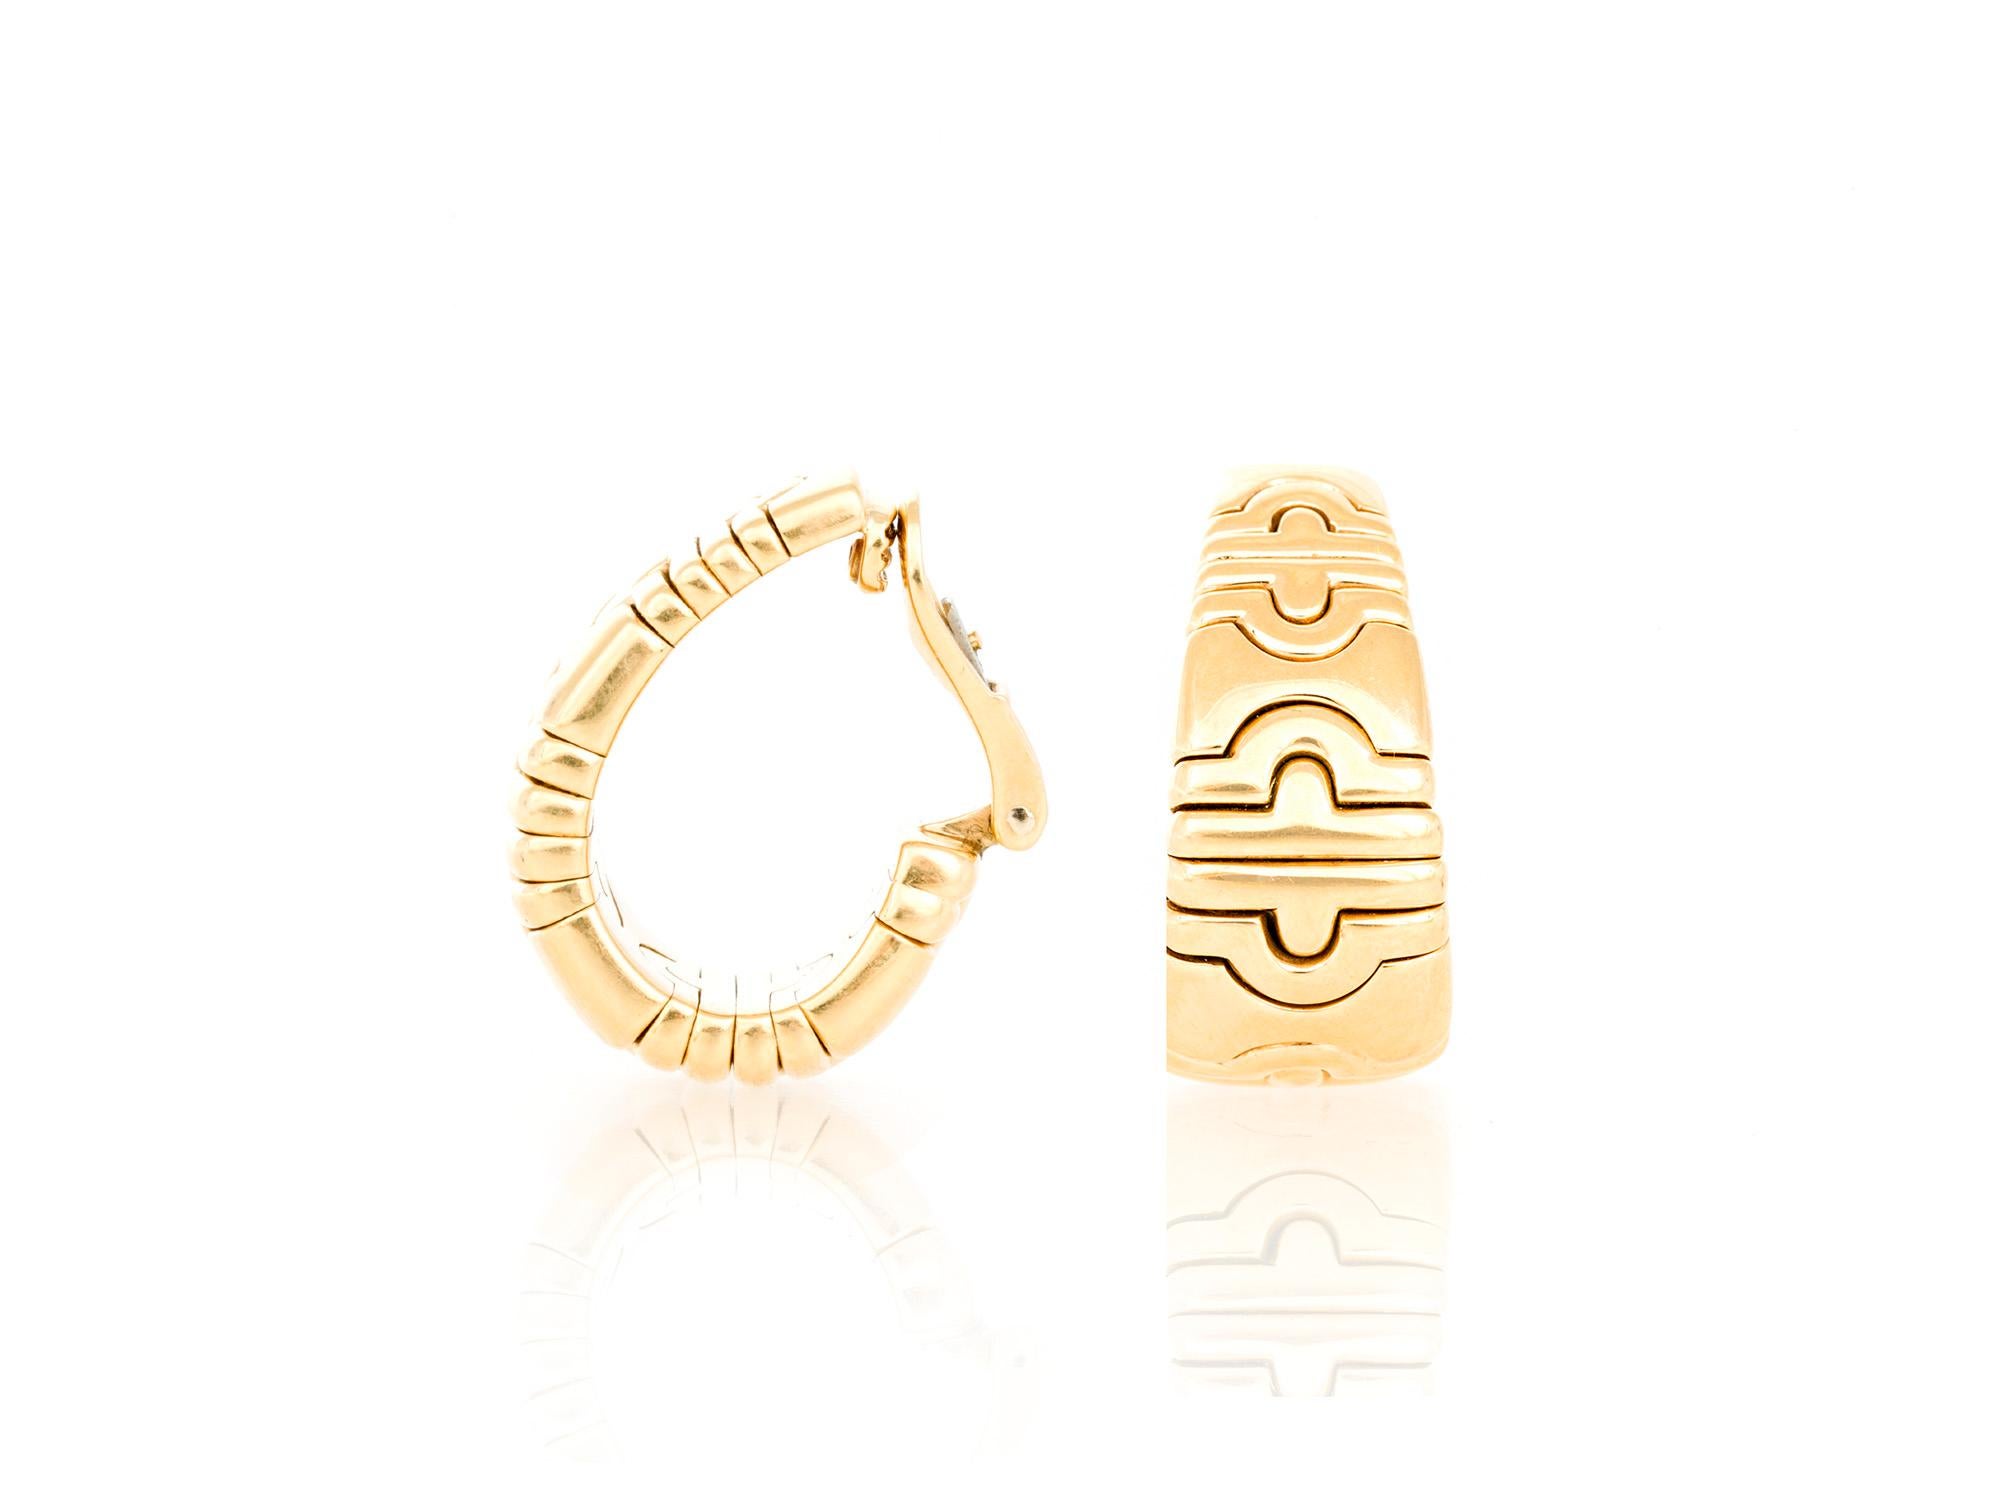 The earrings is finely crafted in 18k yellow gold and weighing approximately total of 31.1 dwt.

Signed by bvlgari.